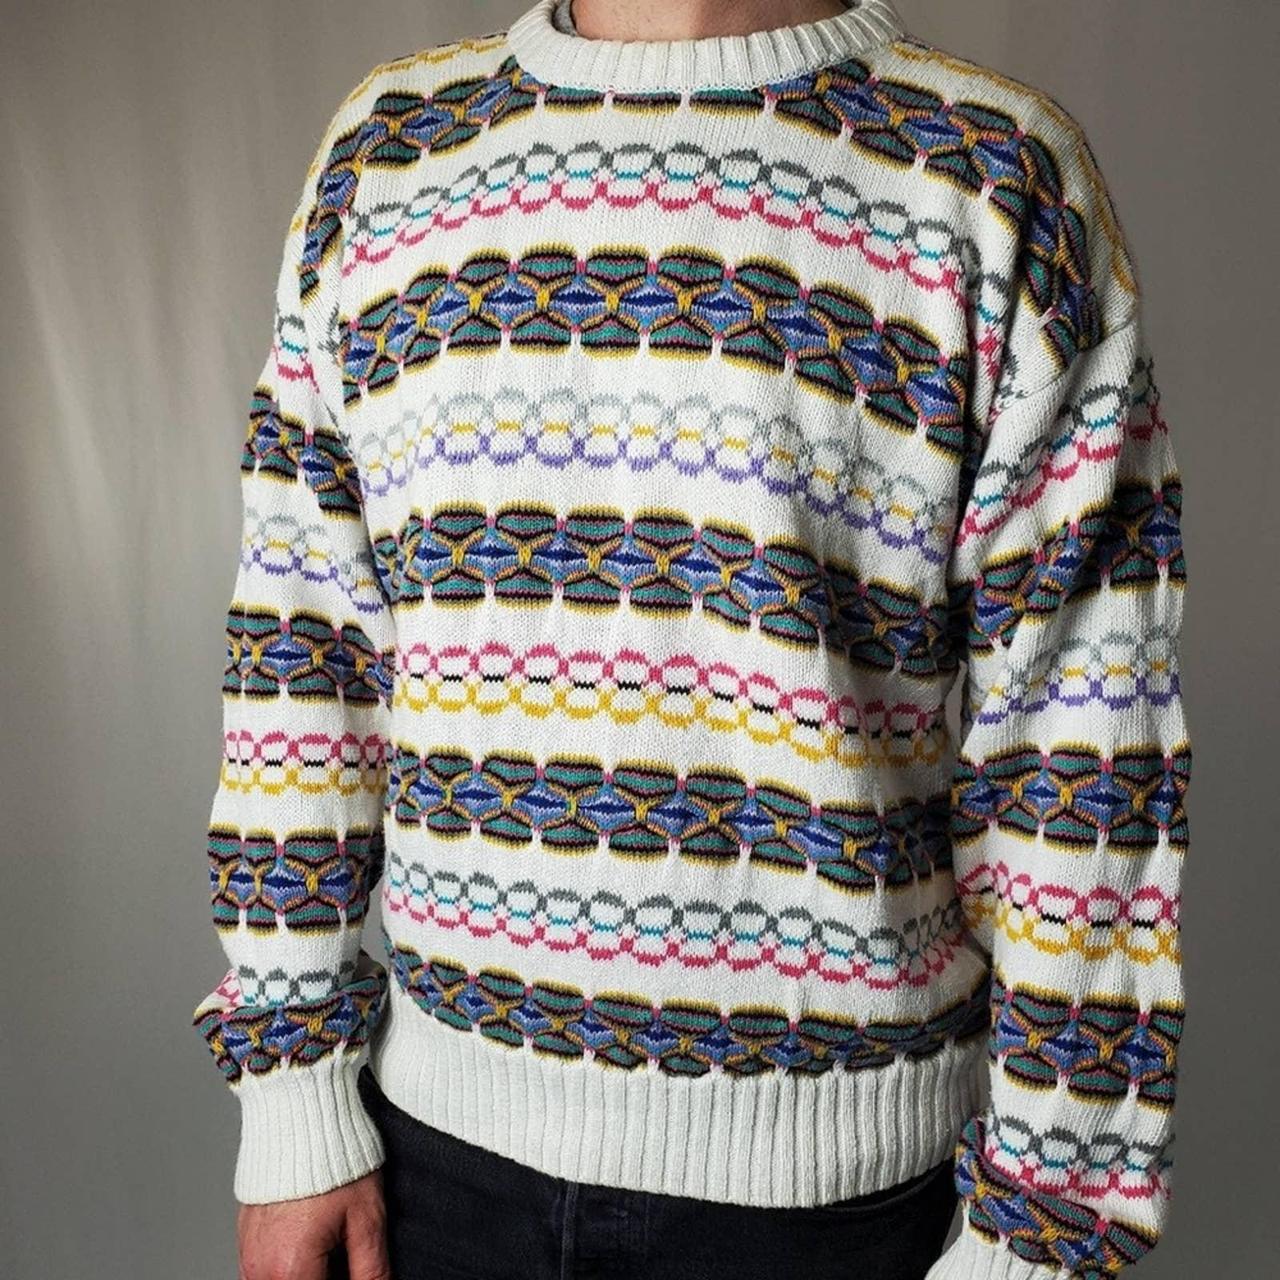 Vintage 90s Chunky Knit Sweater by Peter England 